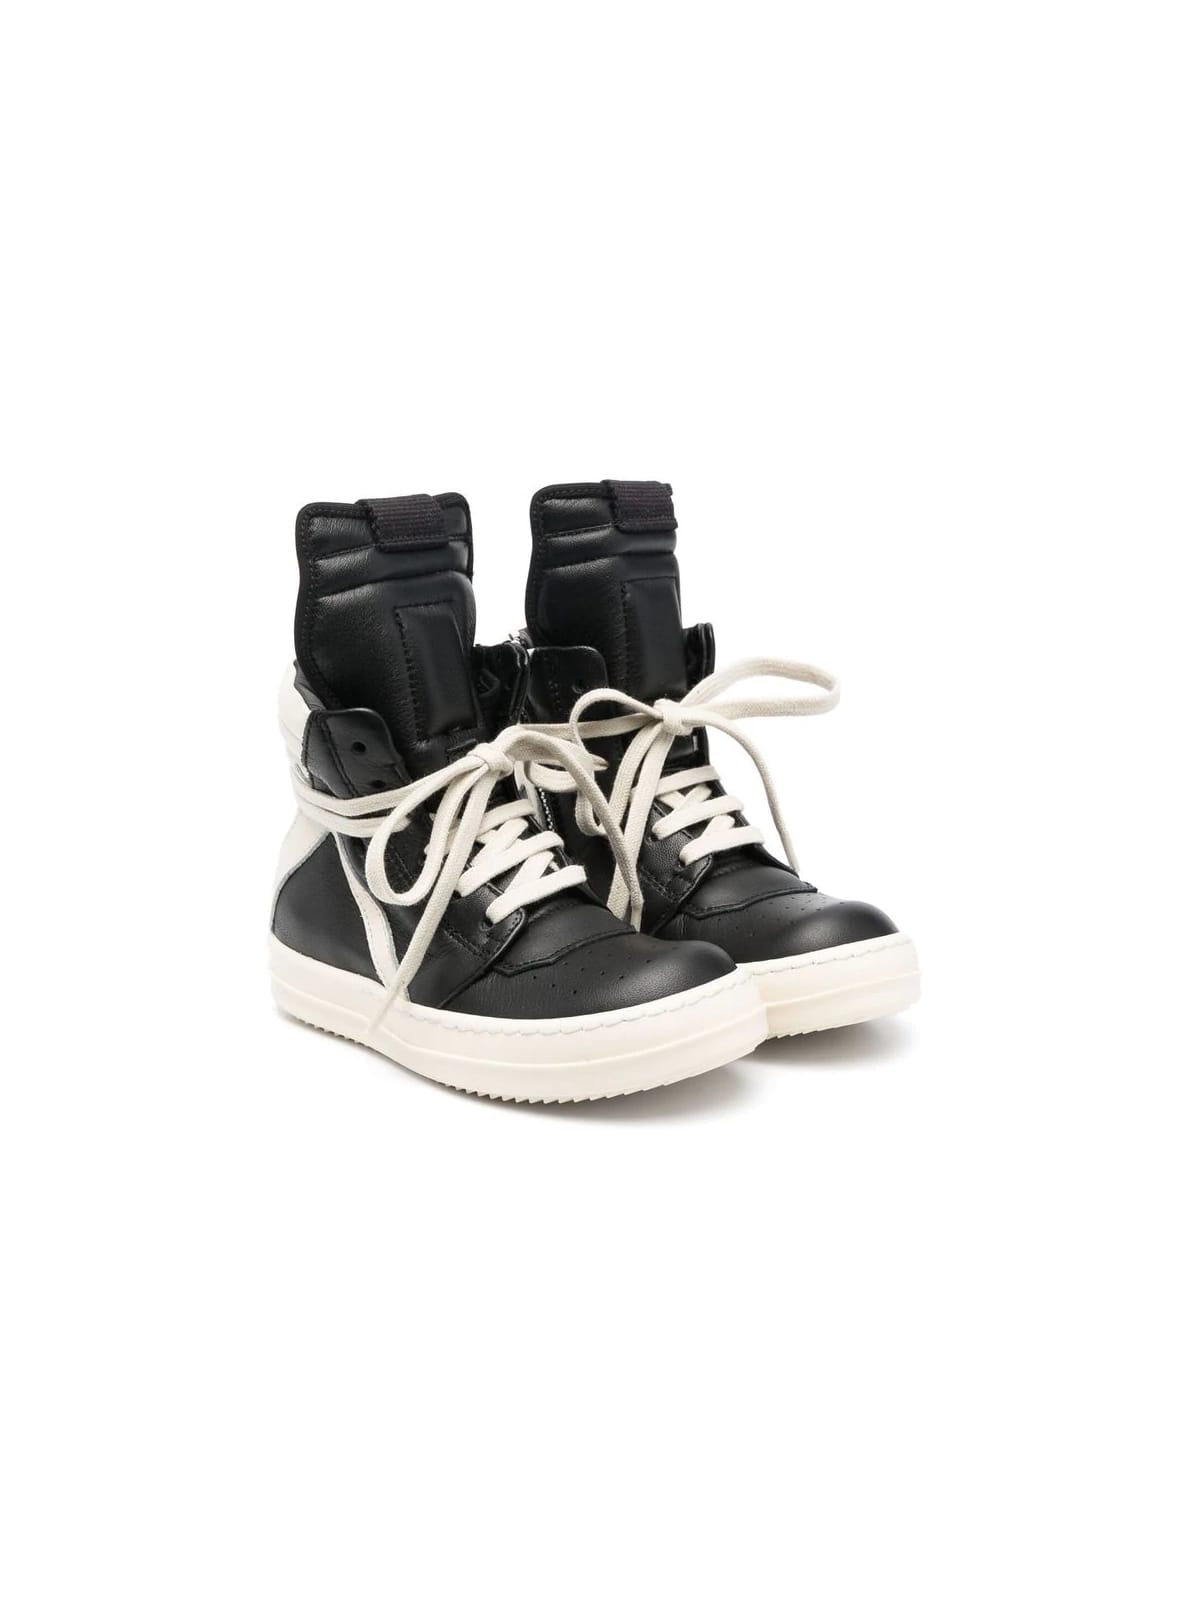 Rick Owens Geobaskets Leather High Sneakers